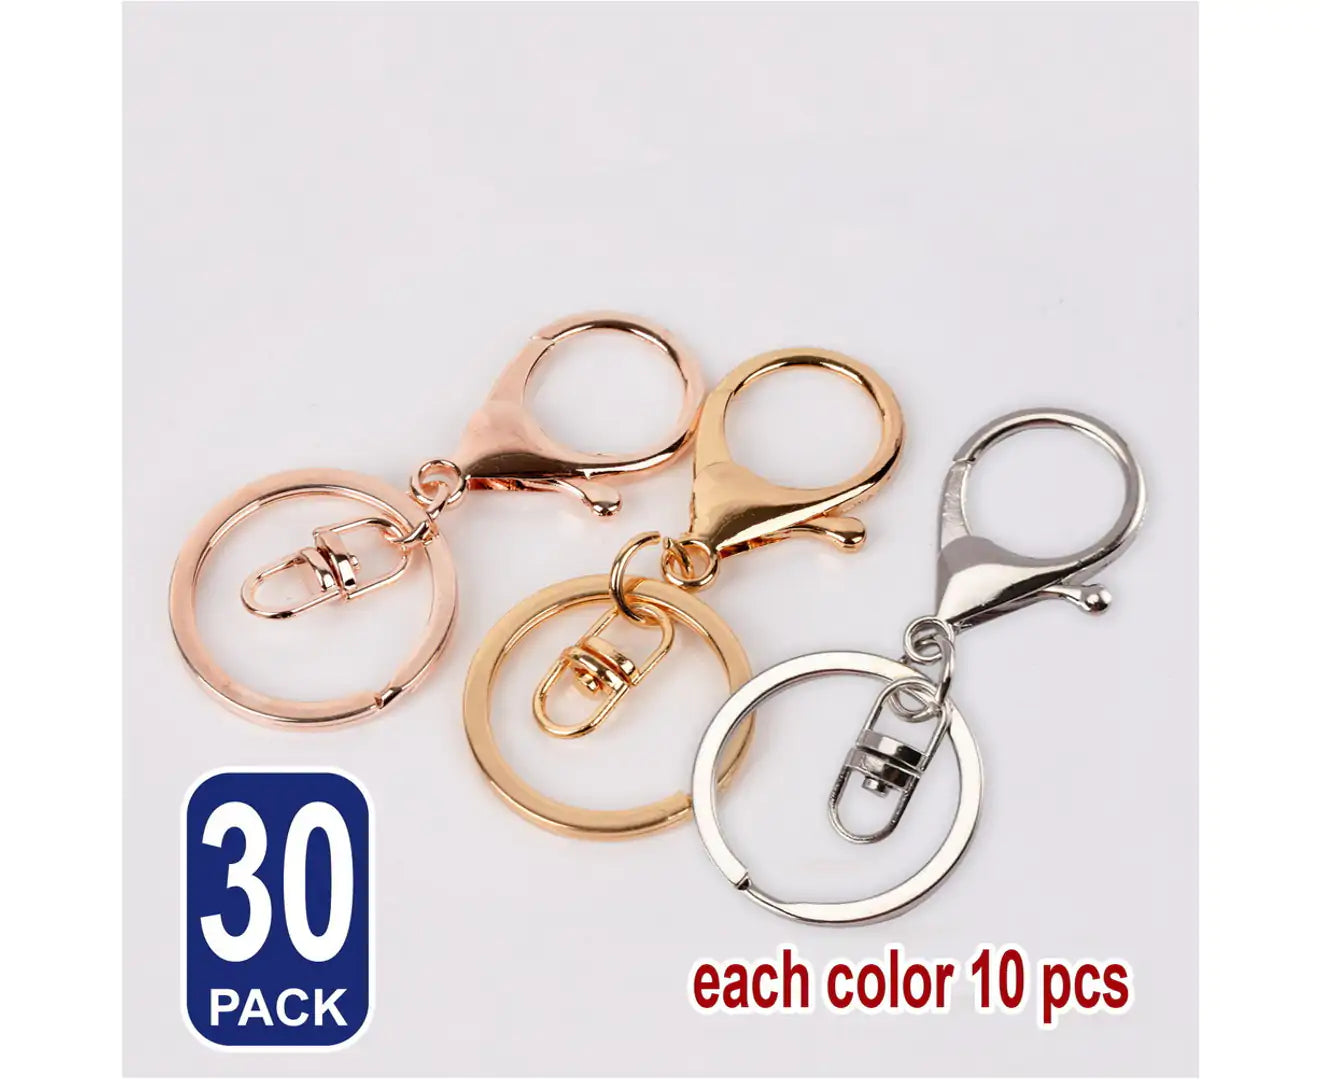 30X Swivel Lobster Clasp Trigger Clip Key Ring Keychain Chain Split Ring Color